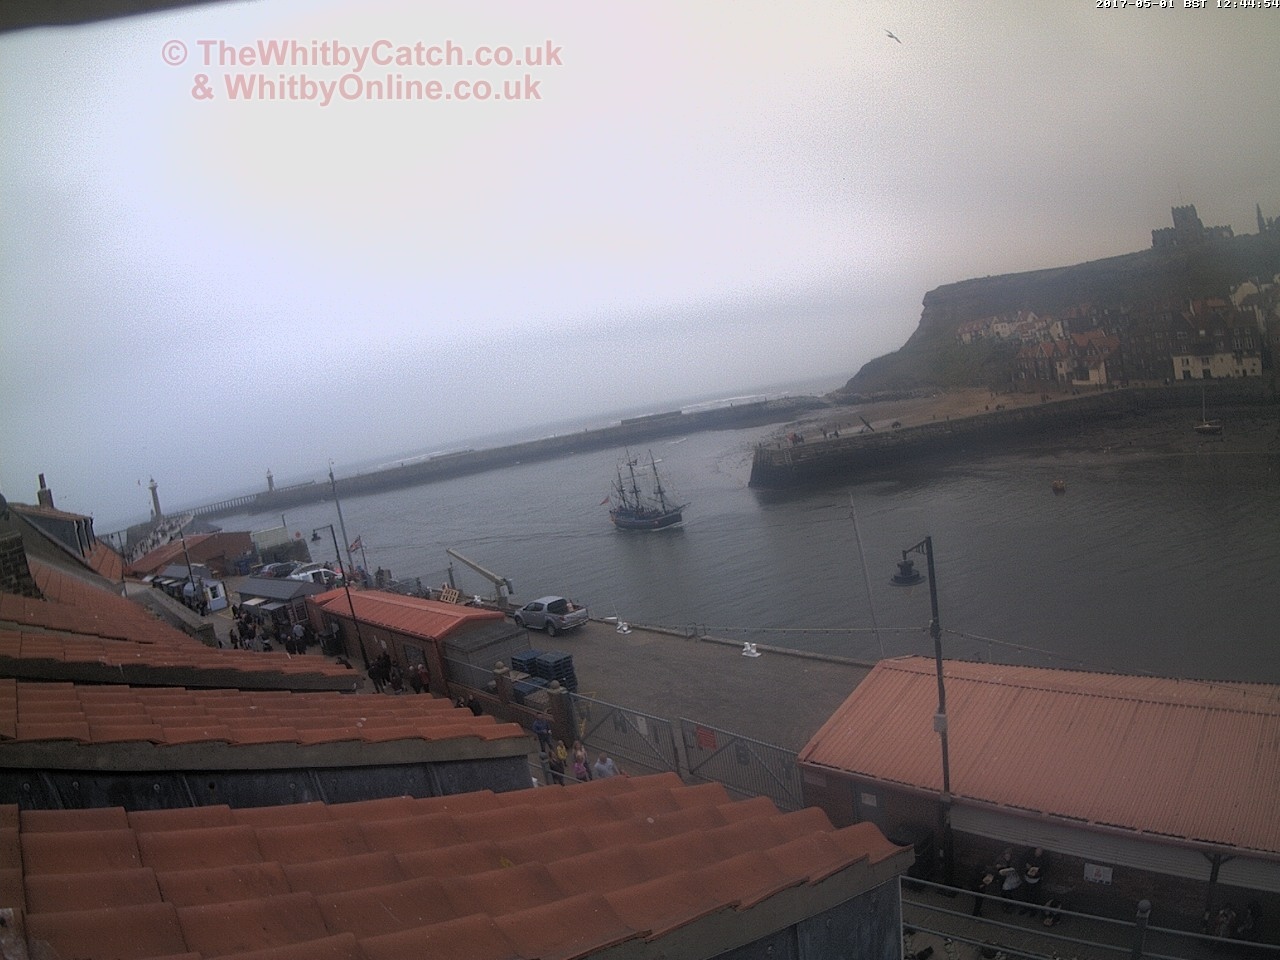 Whitby Mon 1st May 2017 12:45.